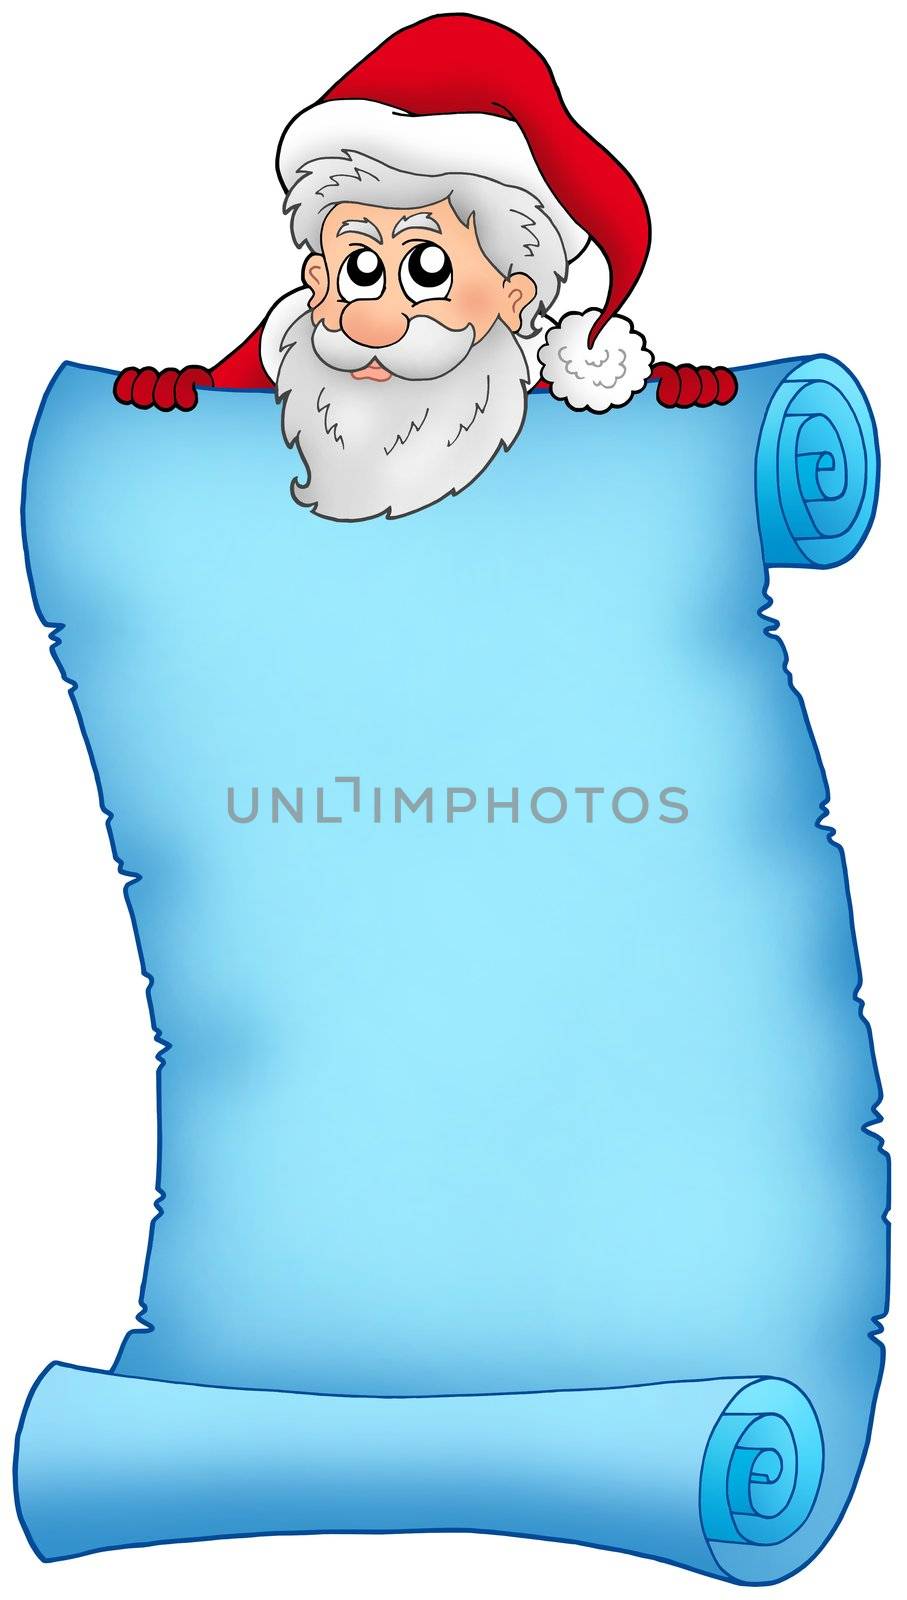 Christmas blue scroll with Santa 2 - color illustration.